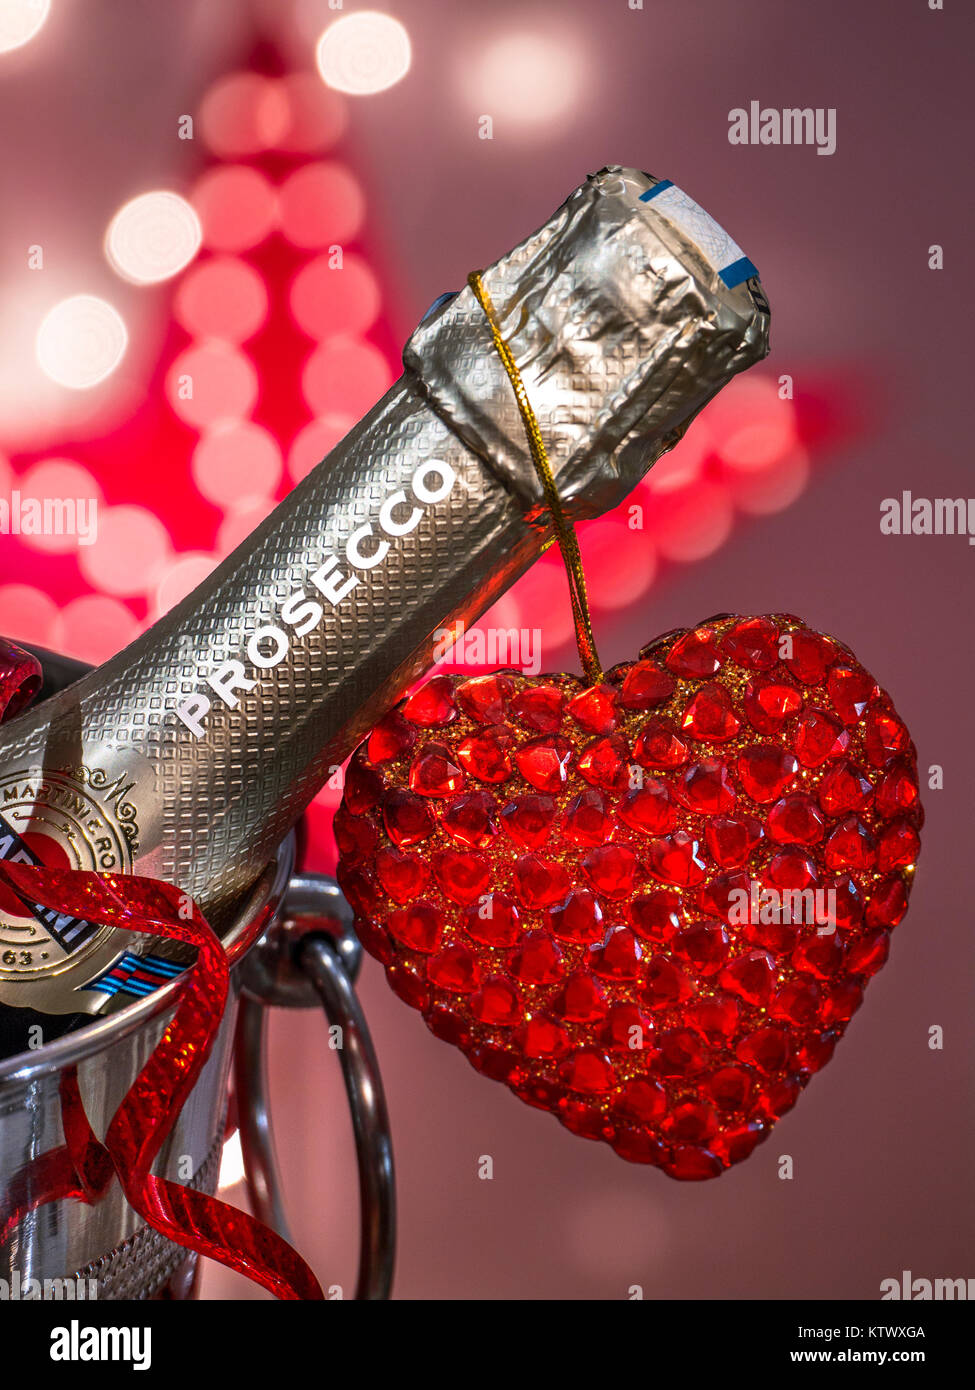 PROSECCO LOVE ROMANCE PARTY LIGHTS Prosecco bottle on ice in wine cooler with  party streamer & sparkling love heart and celebration lights Stock Photo